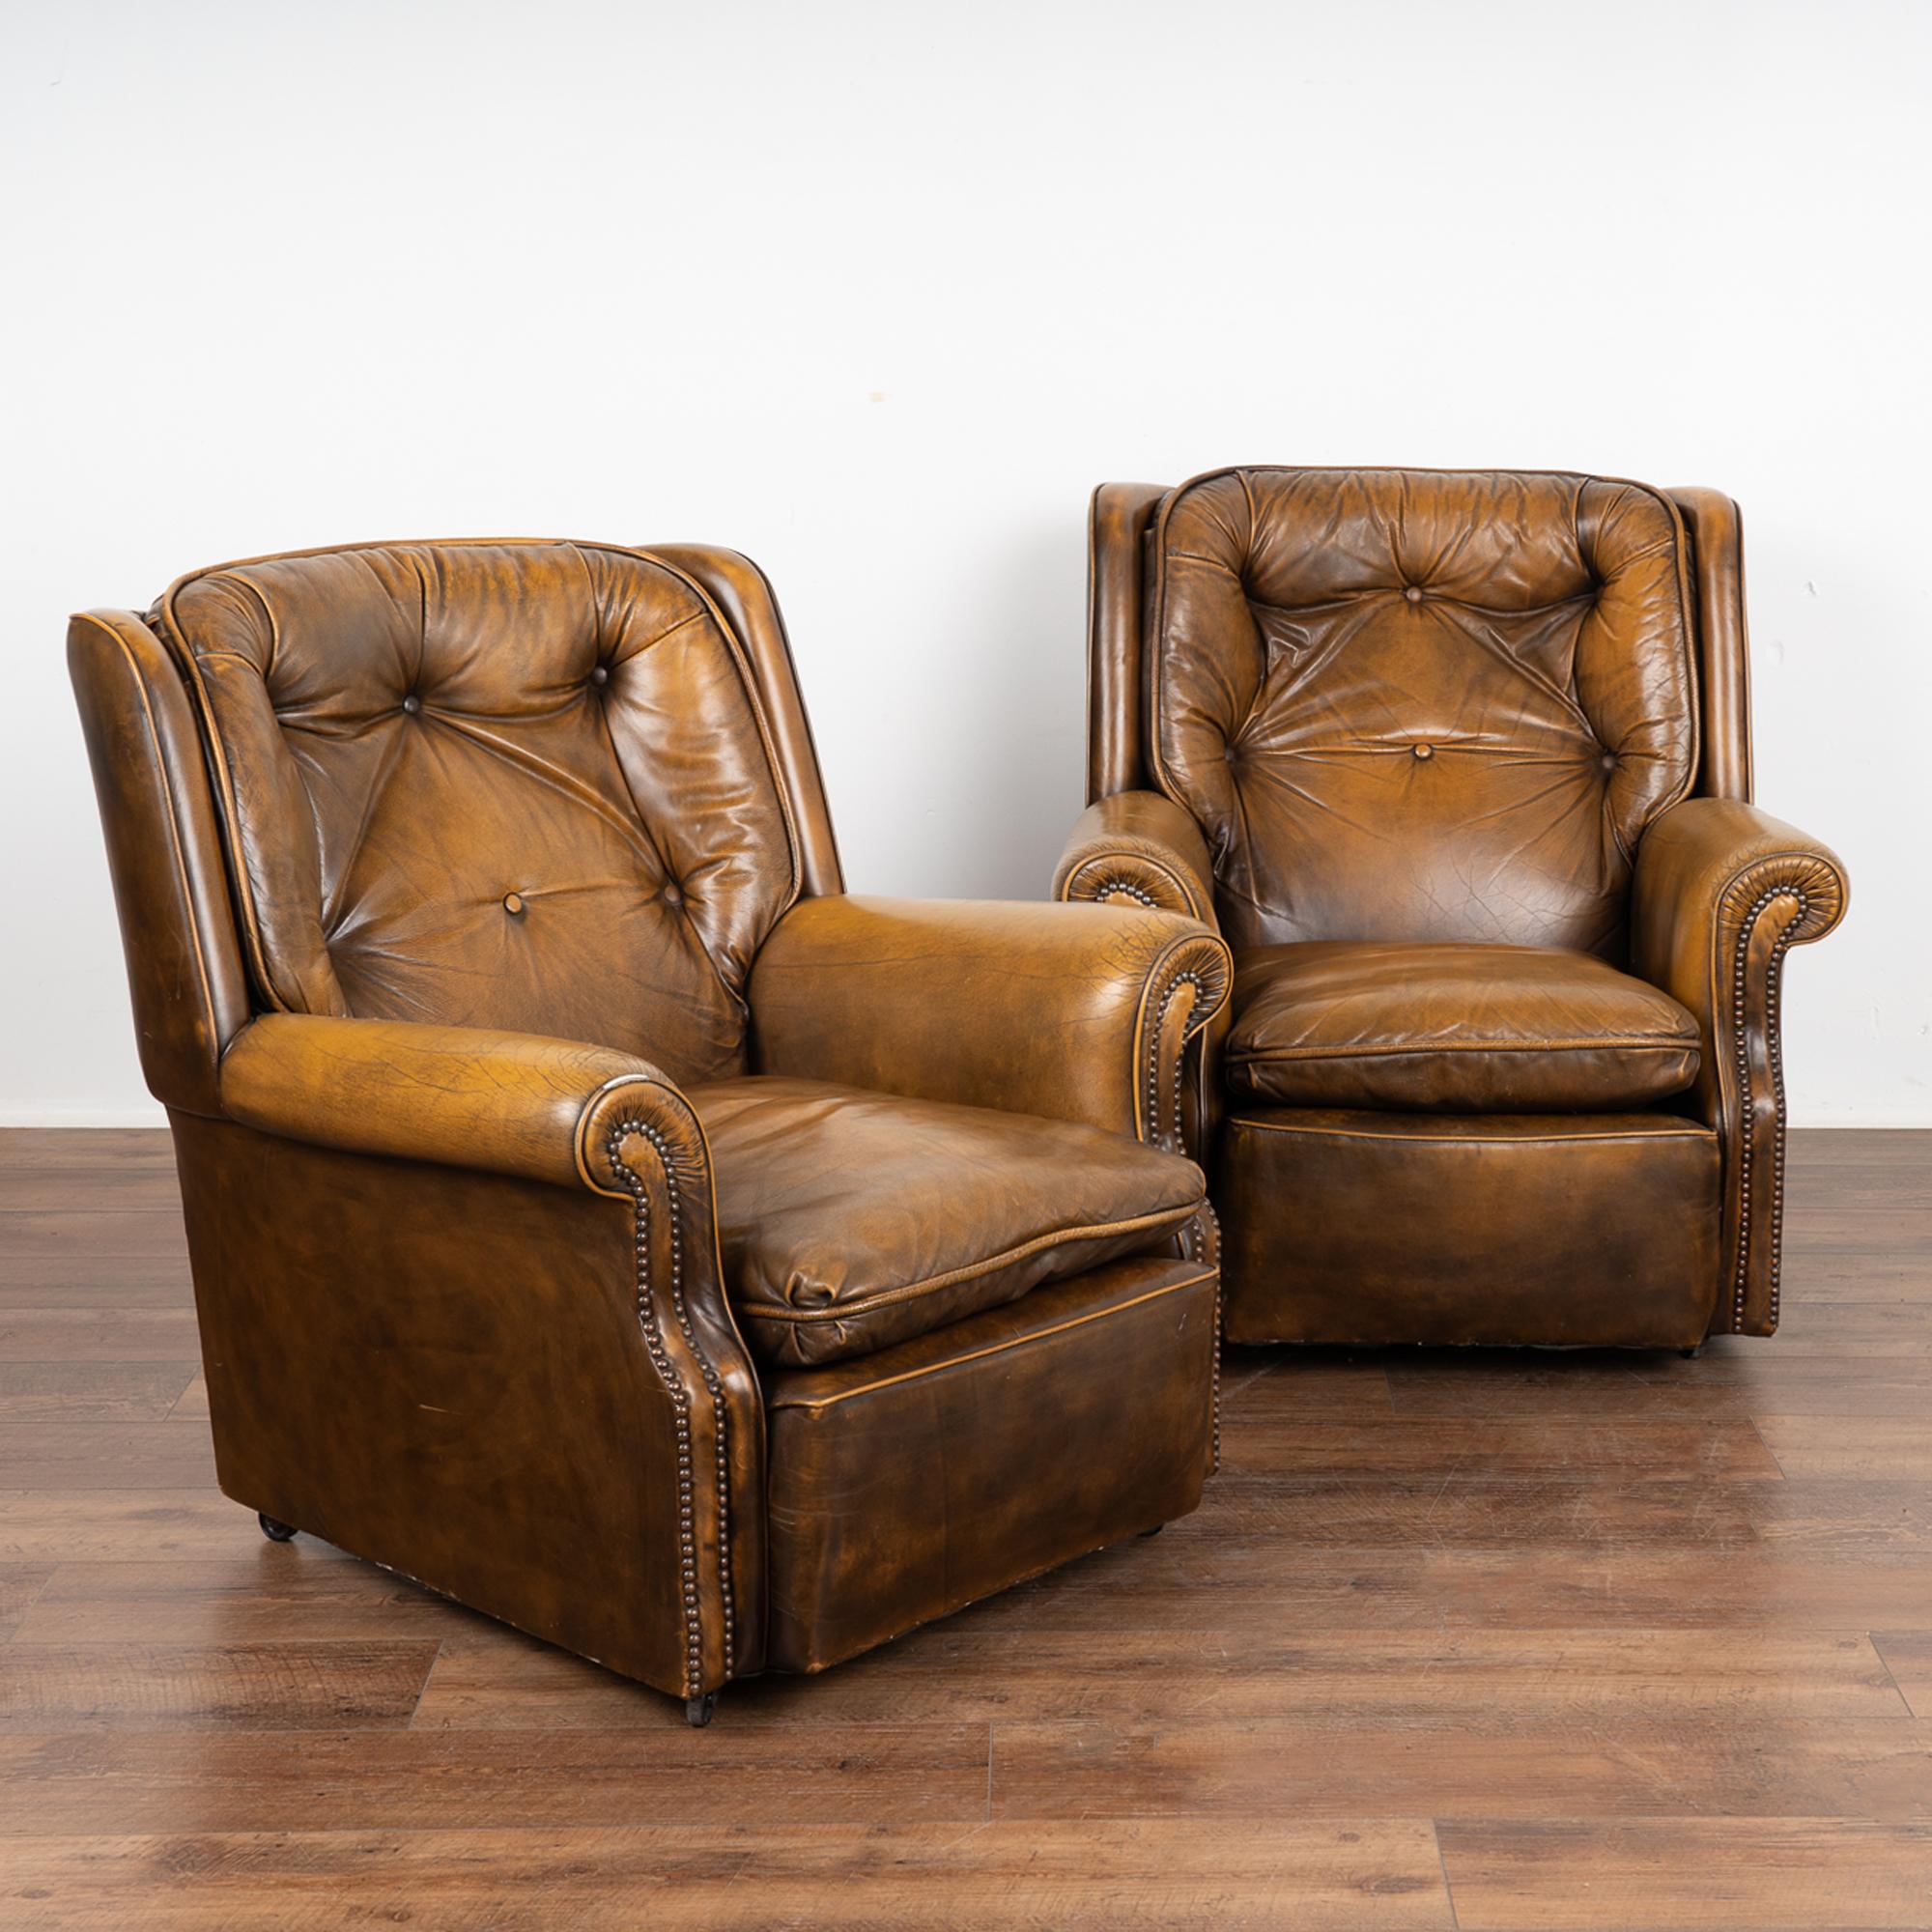 Pair, vintage leather lounge chairs with tufted back each resting on four castor feet.
Vintage brown leather with mottled dark and lighter tones, nail head trim along arms and six buttons along back cushion.
Natural distress including scratches,